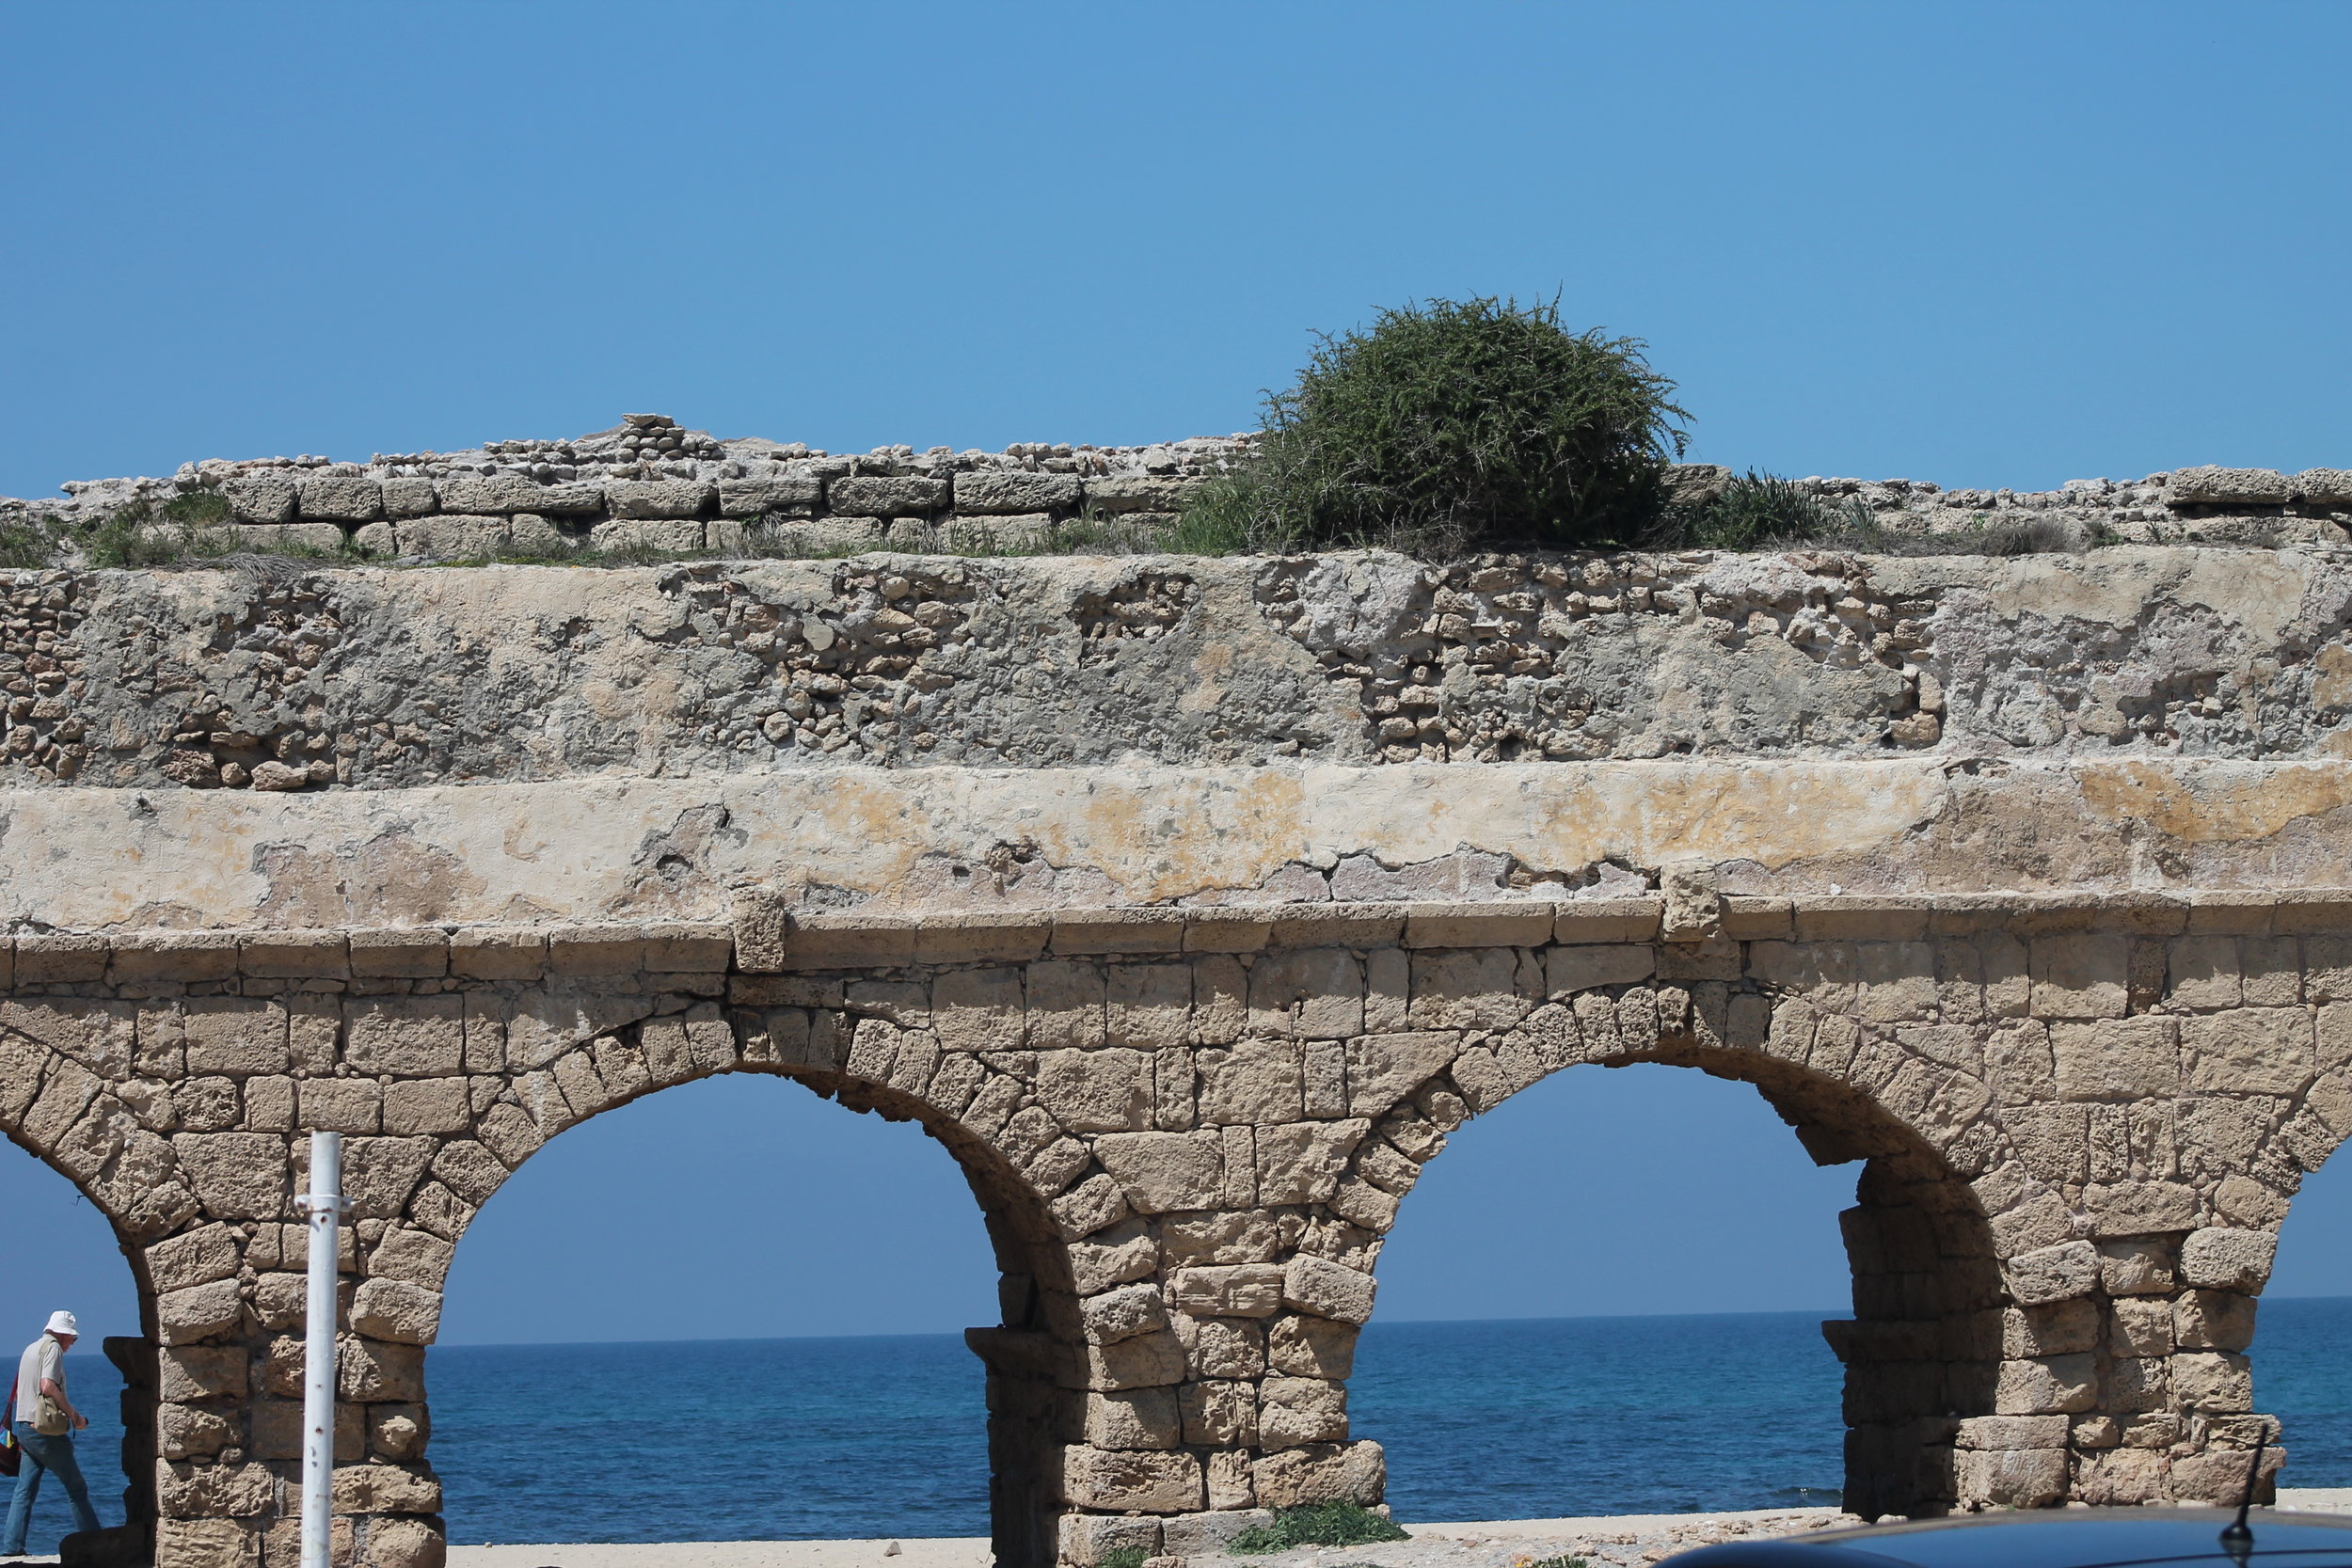 The ancient 8-mile-long aqueduct built by Herod the Great to bring fresh water to his outdoor pool at the edge of the Mediterranean Sea.